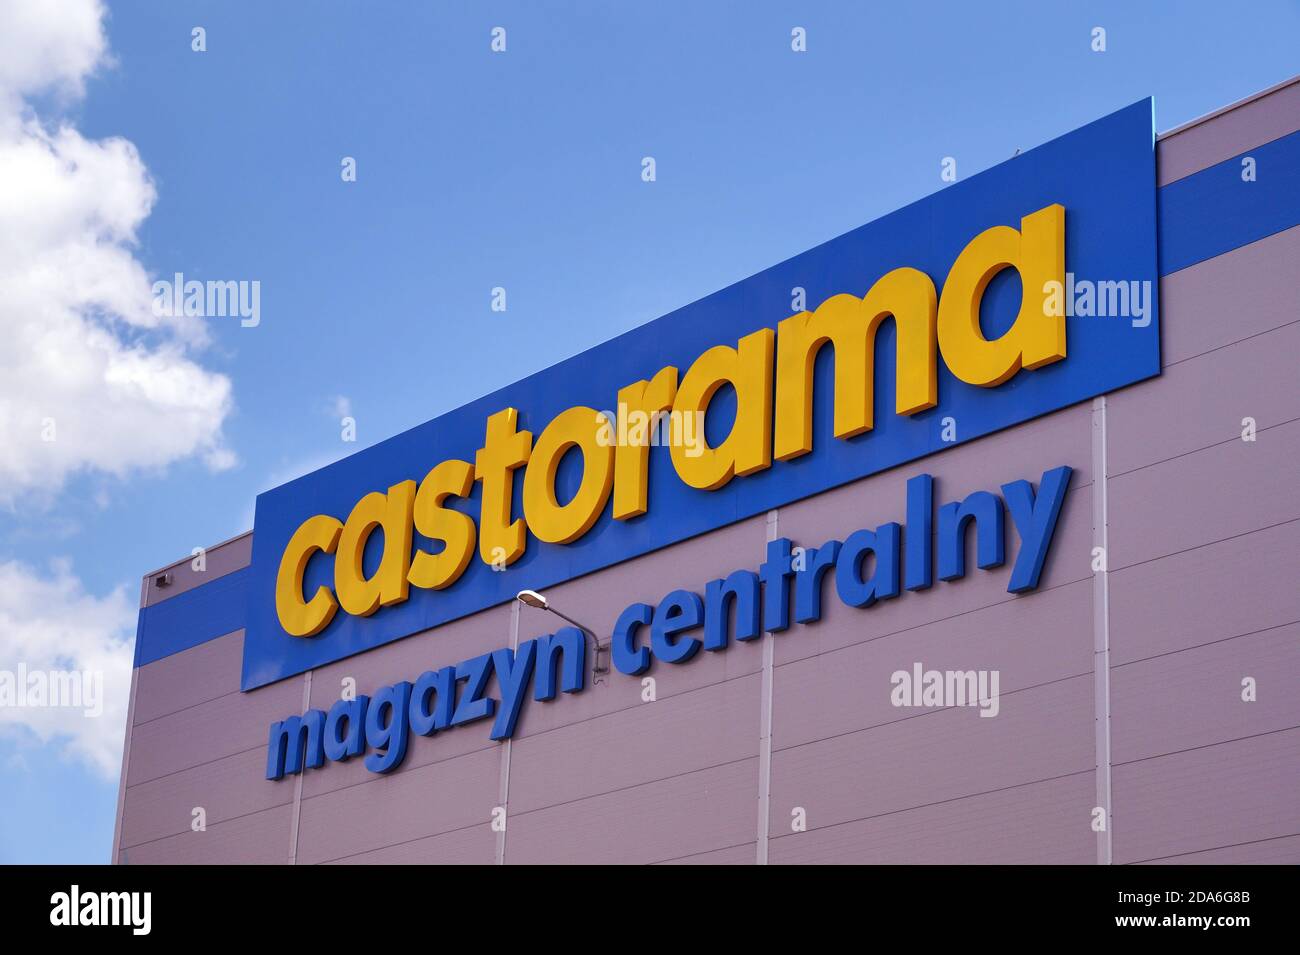 Chain of stores such as: "Home Improvement". Castorama - distribution  center of chain stores in Europe. Town of Biała. Poland. April 4, 2020  Stock Photo - Alamy